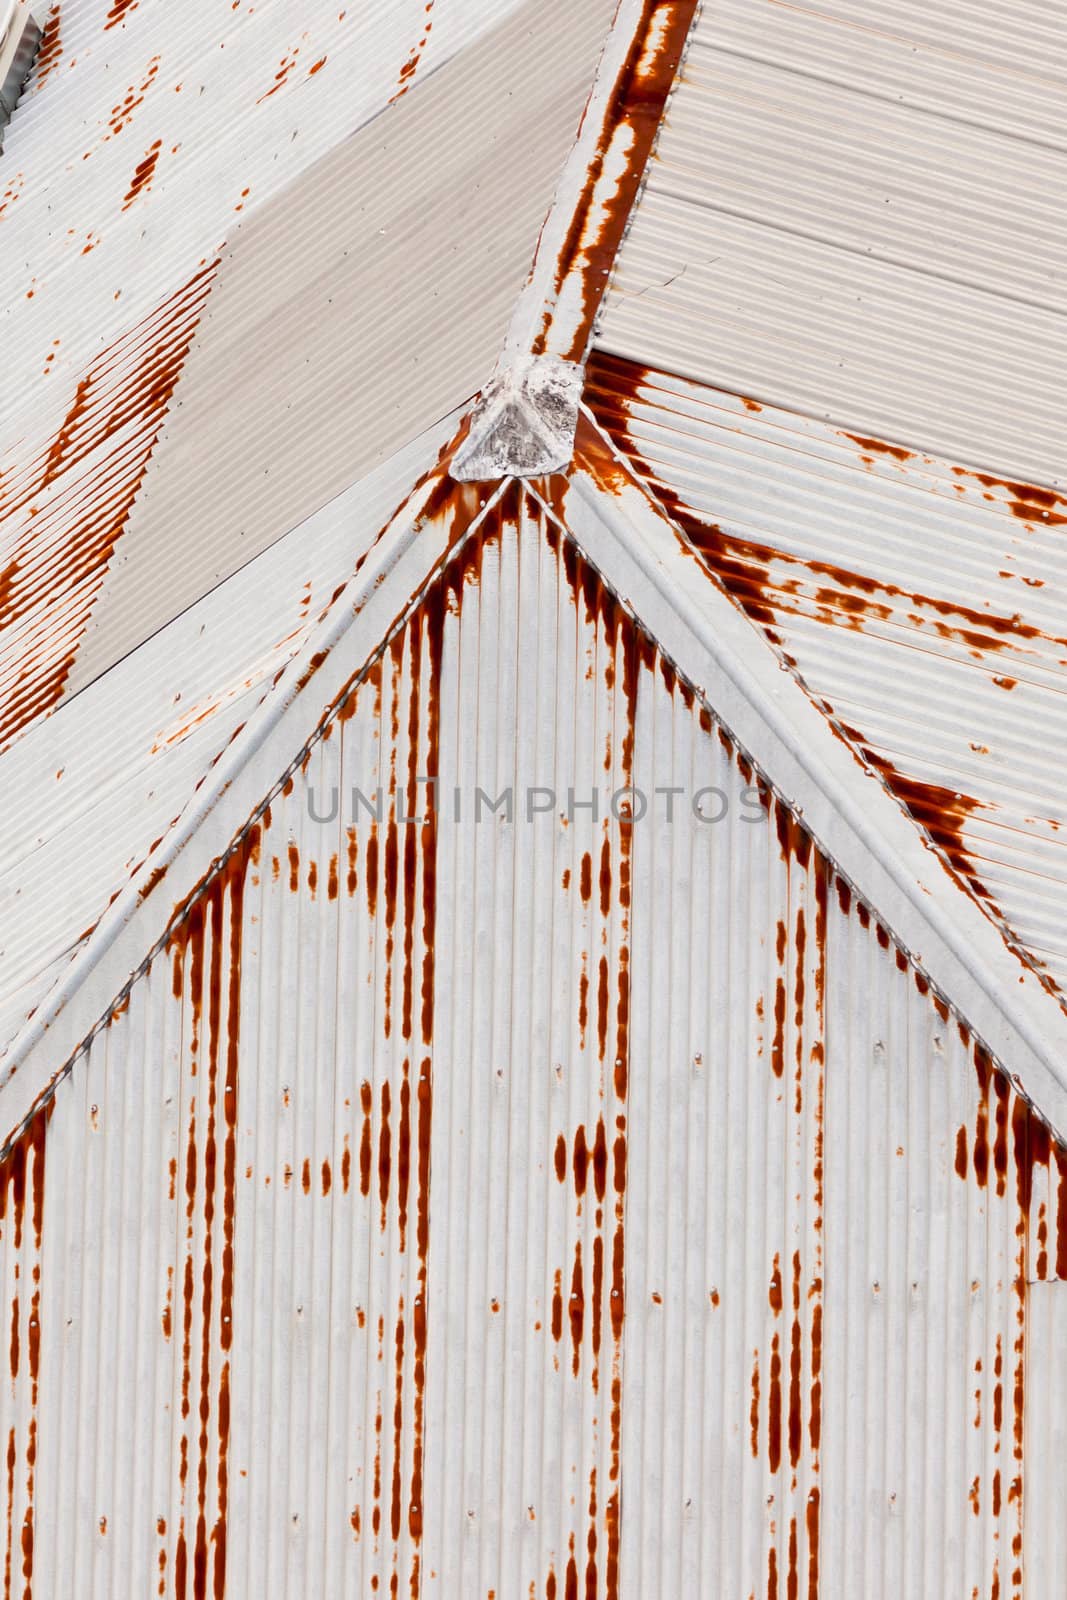 Abstract background pattren of grungy metal roof by PiLens